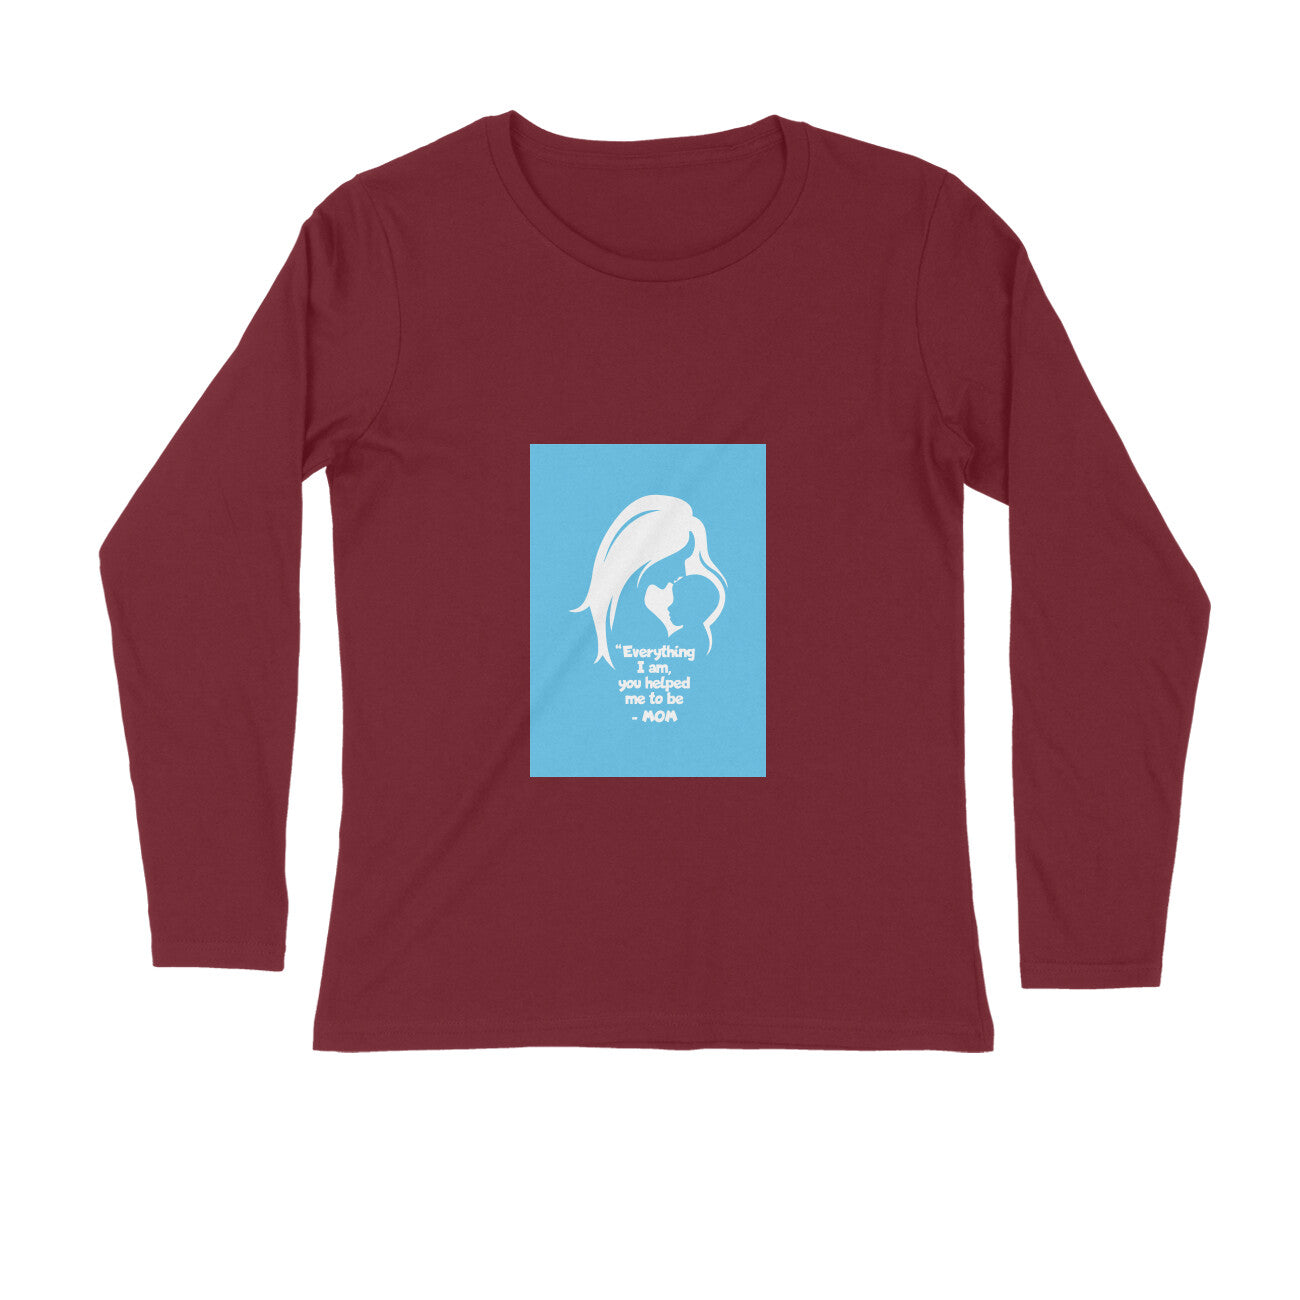 MOM - Love is mother and we are born of them - Long Sleeve Unisex Tee